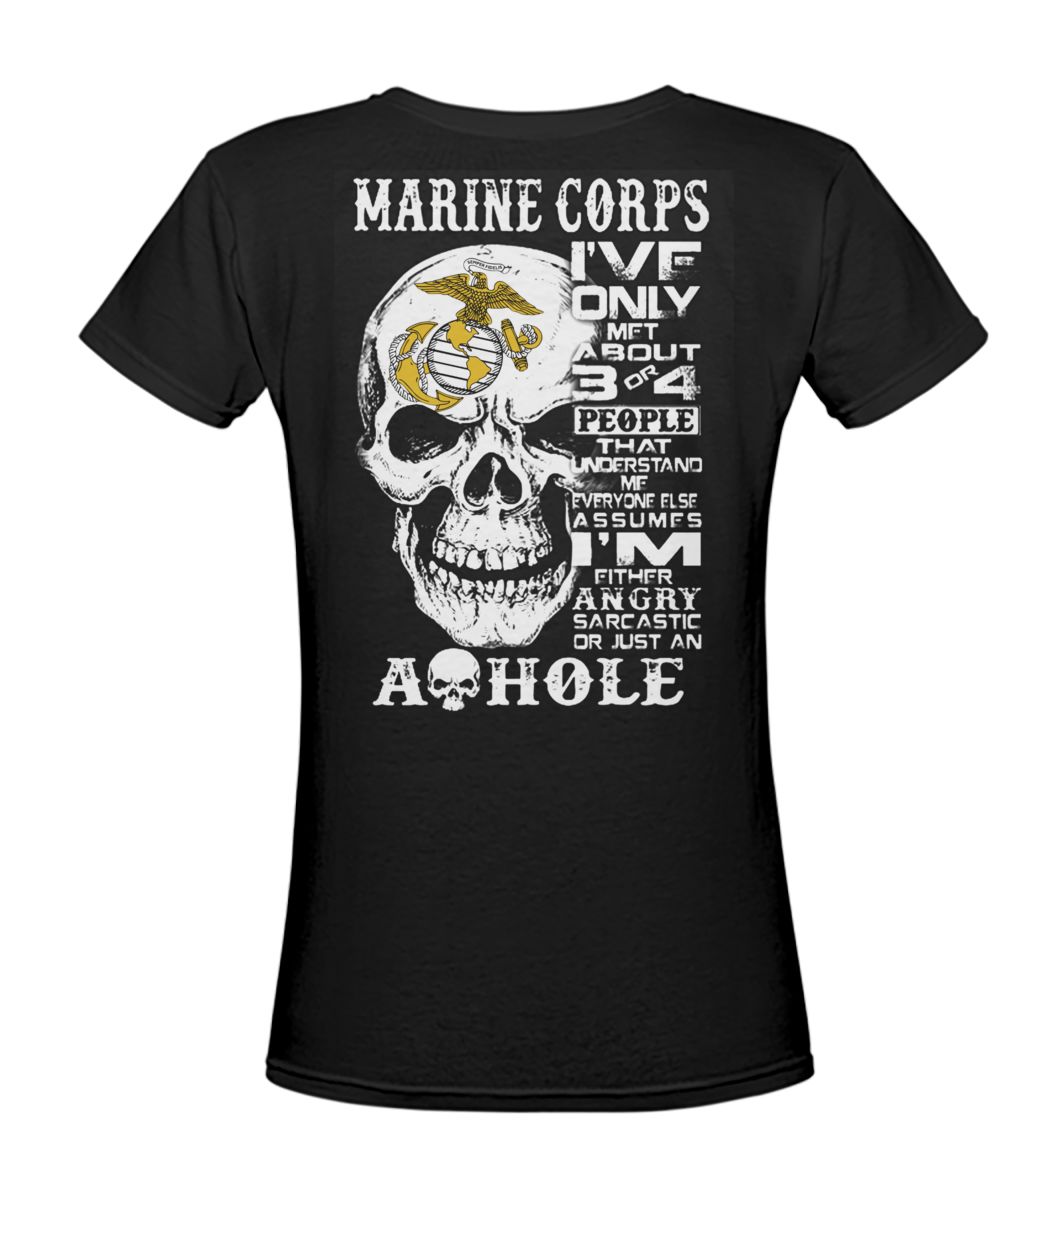 Marine corps I've only met about 3 or 4 people that understand me skull women's v-neck